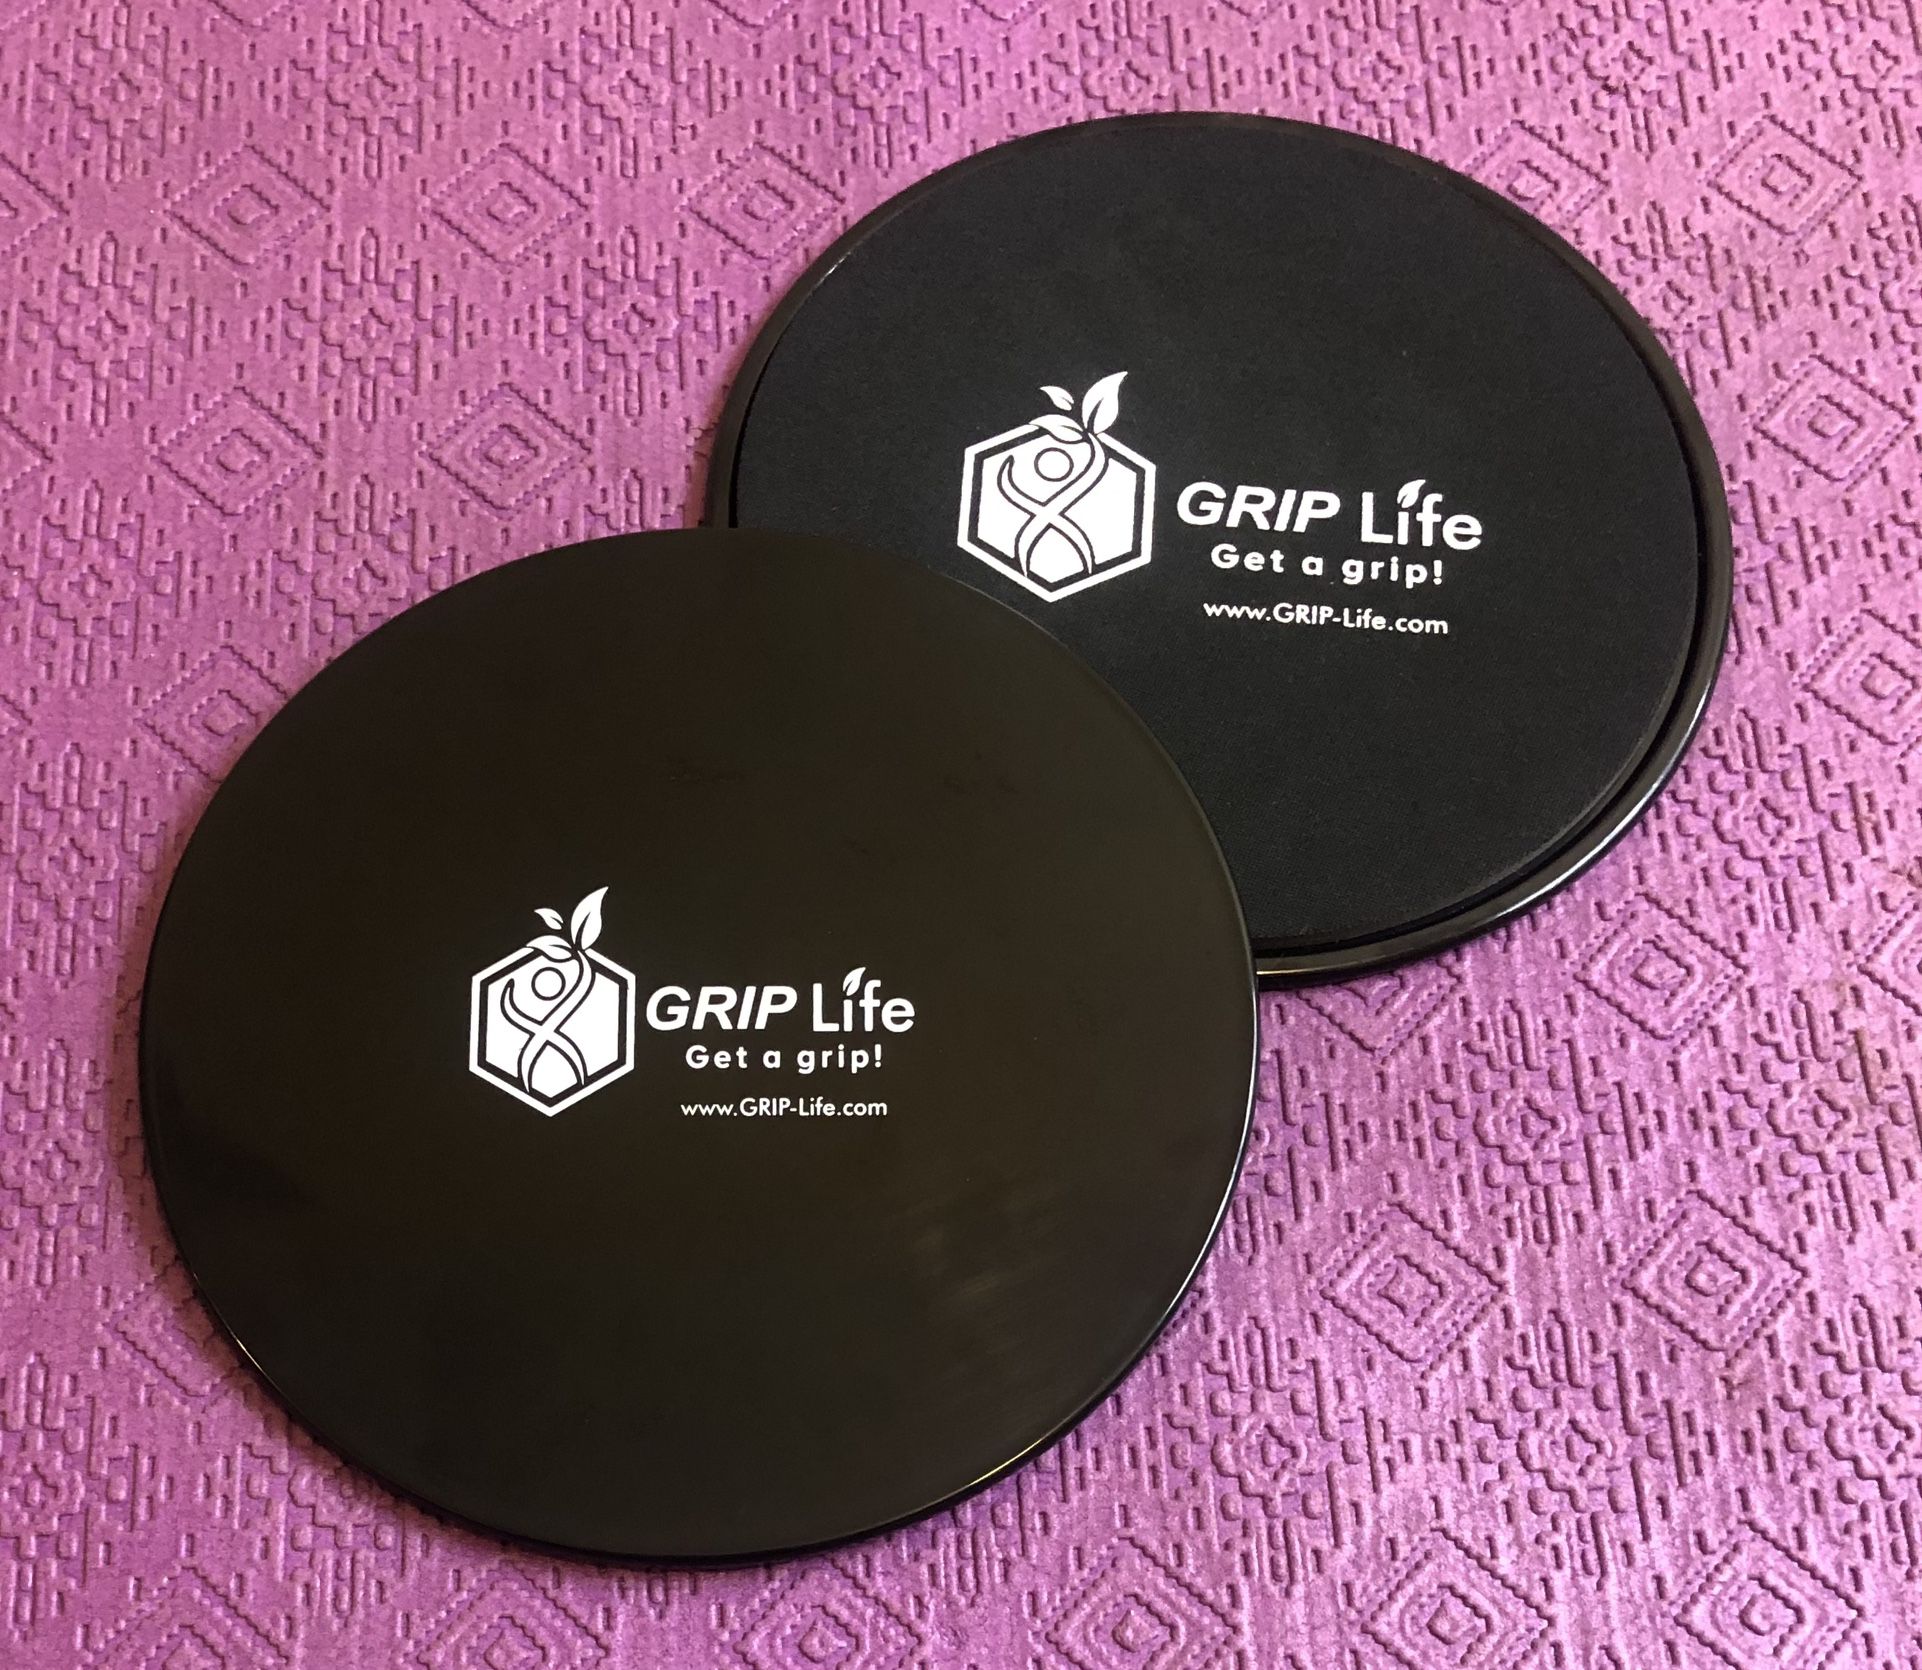 Slider Exercise Discs for abs core total body workout from home or gym